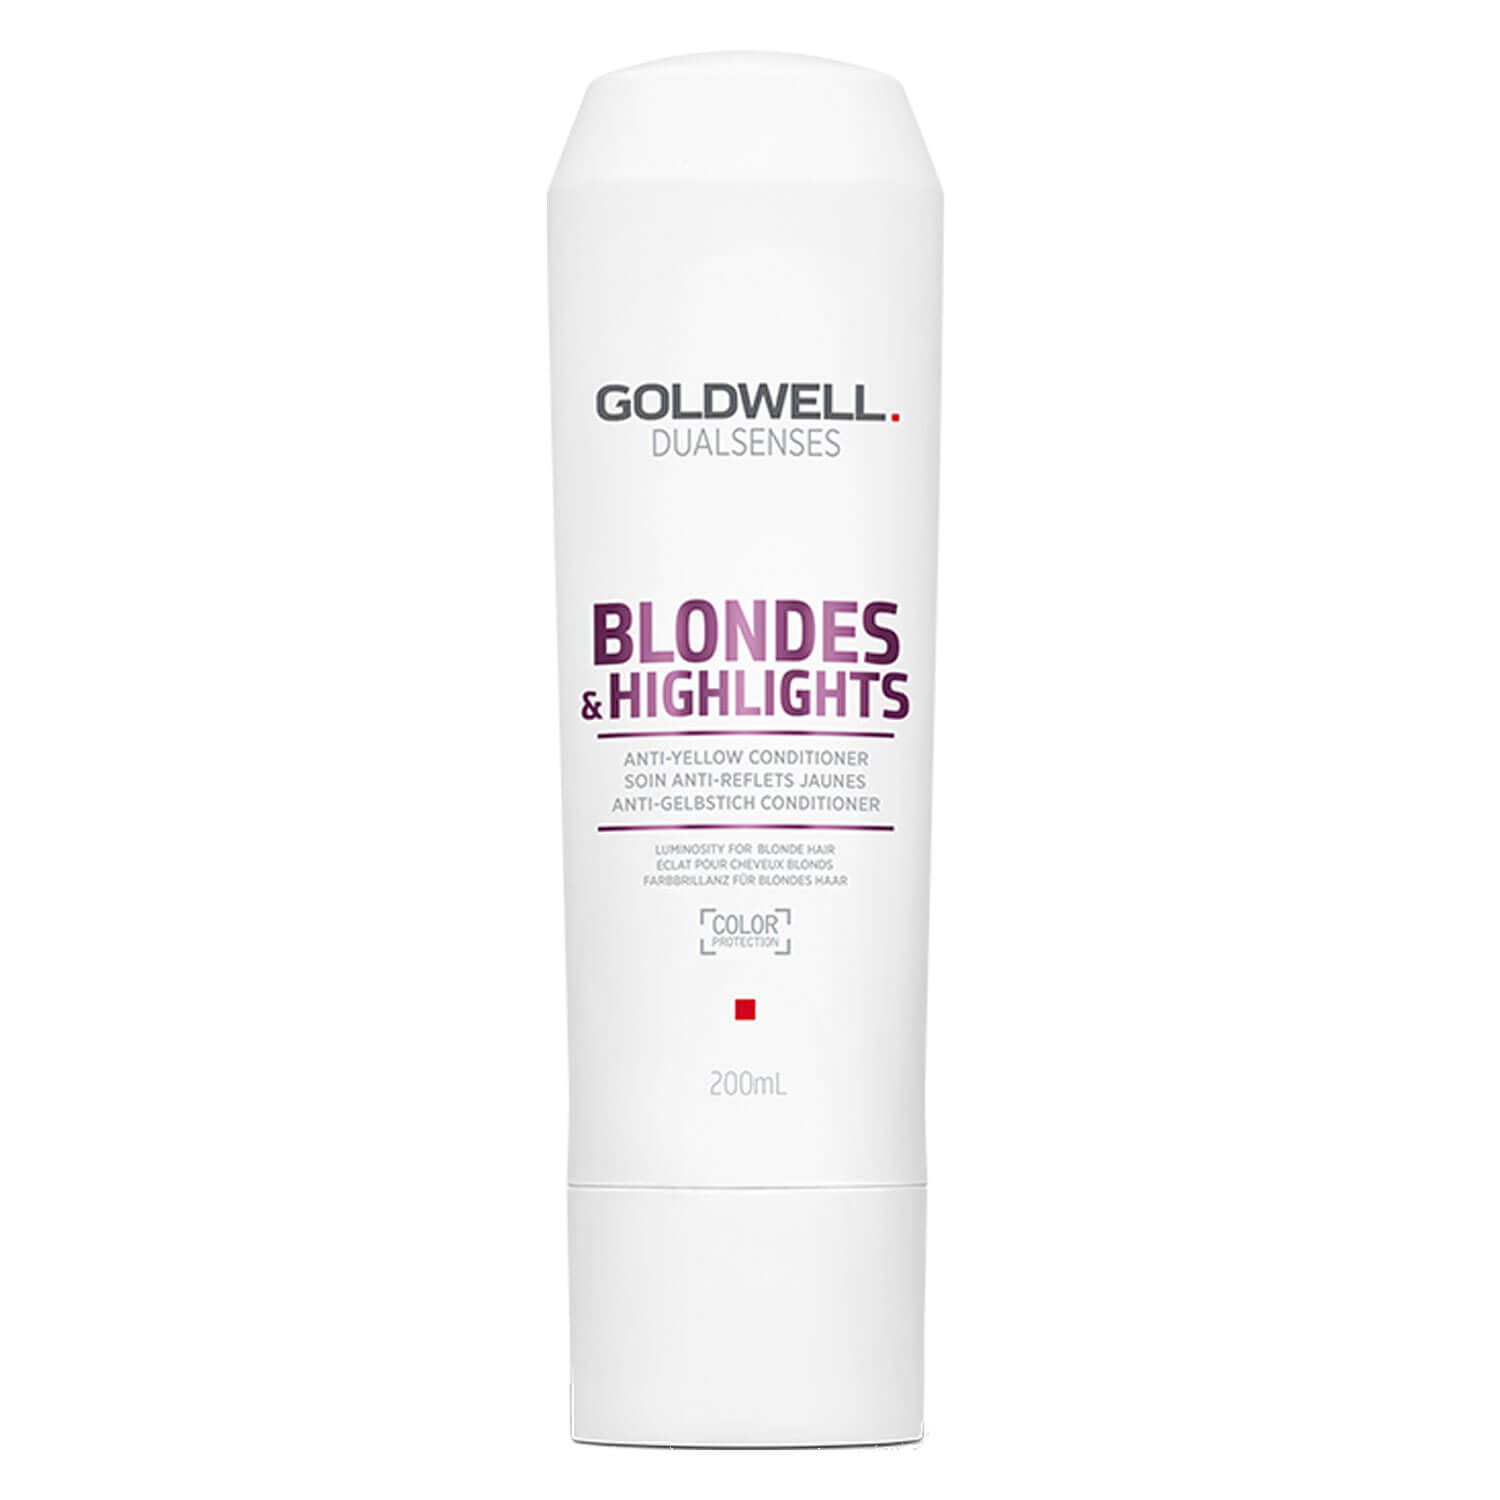 Goldwell Dualsenses Blondes&Highlights Conditioner 29503